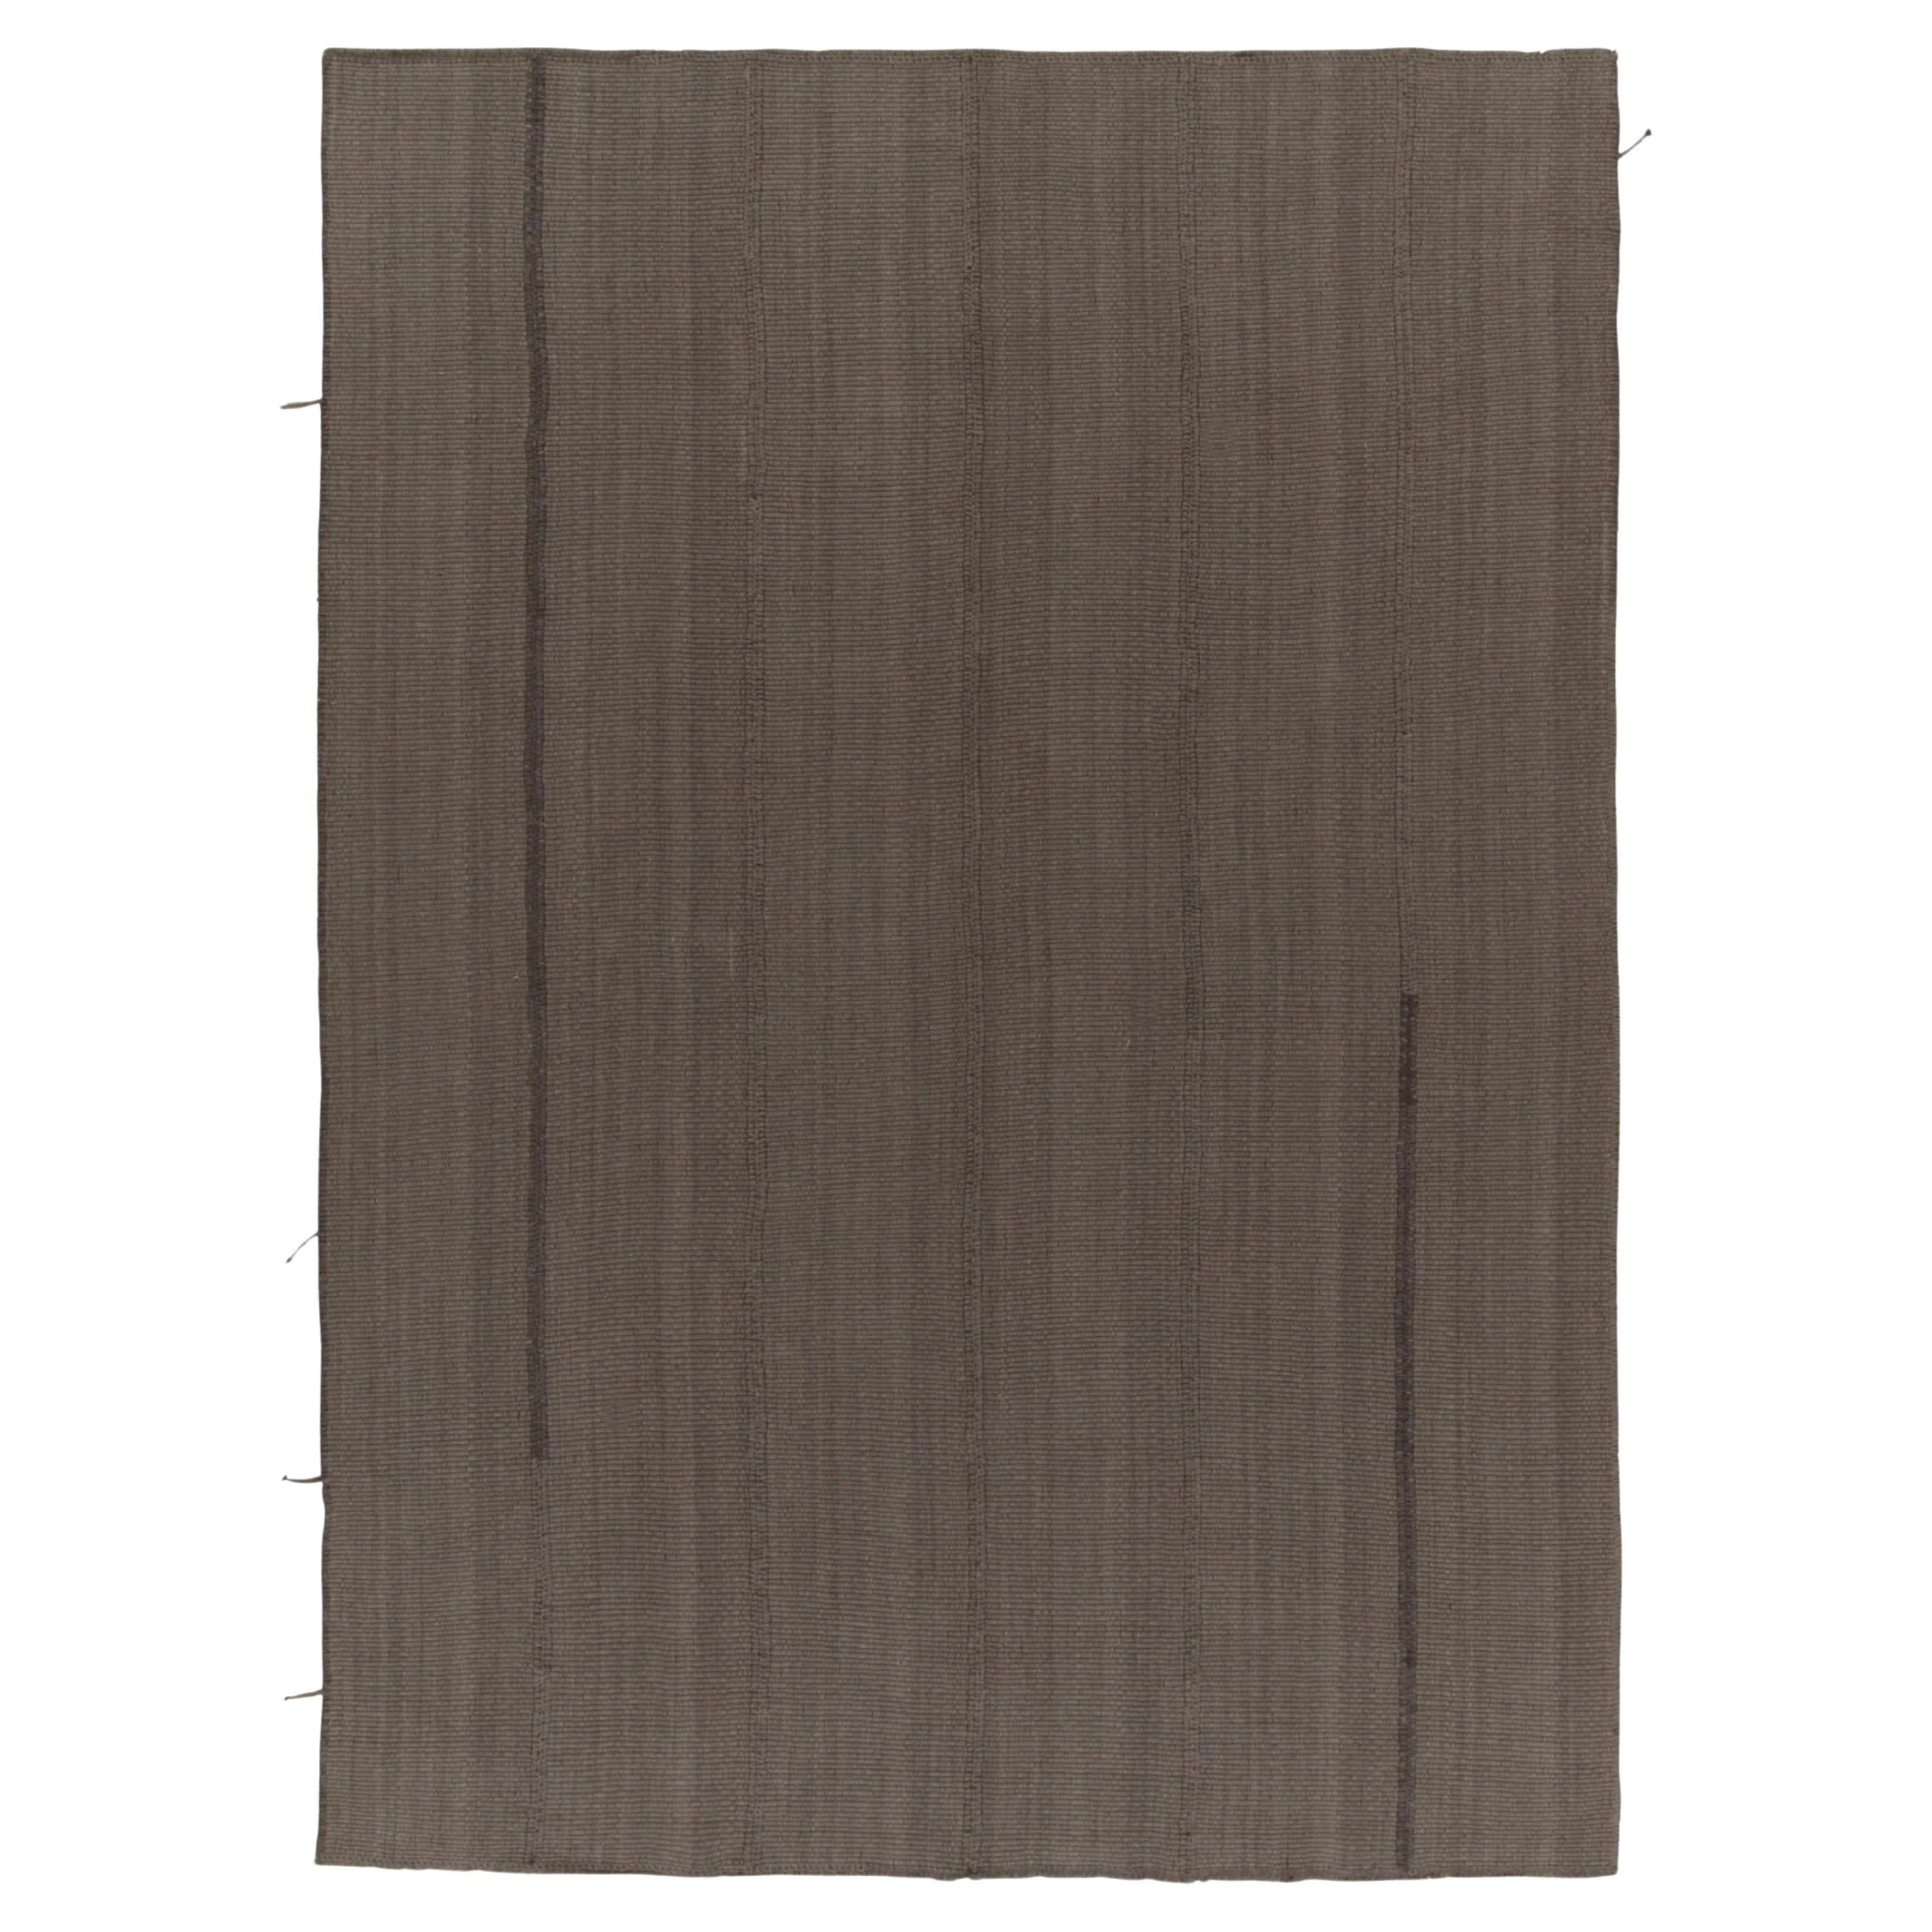 Rug & Kilim’s Contemporary Kilims in Muted Brown Stripes, Panel Woven Style